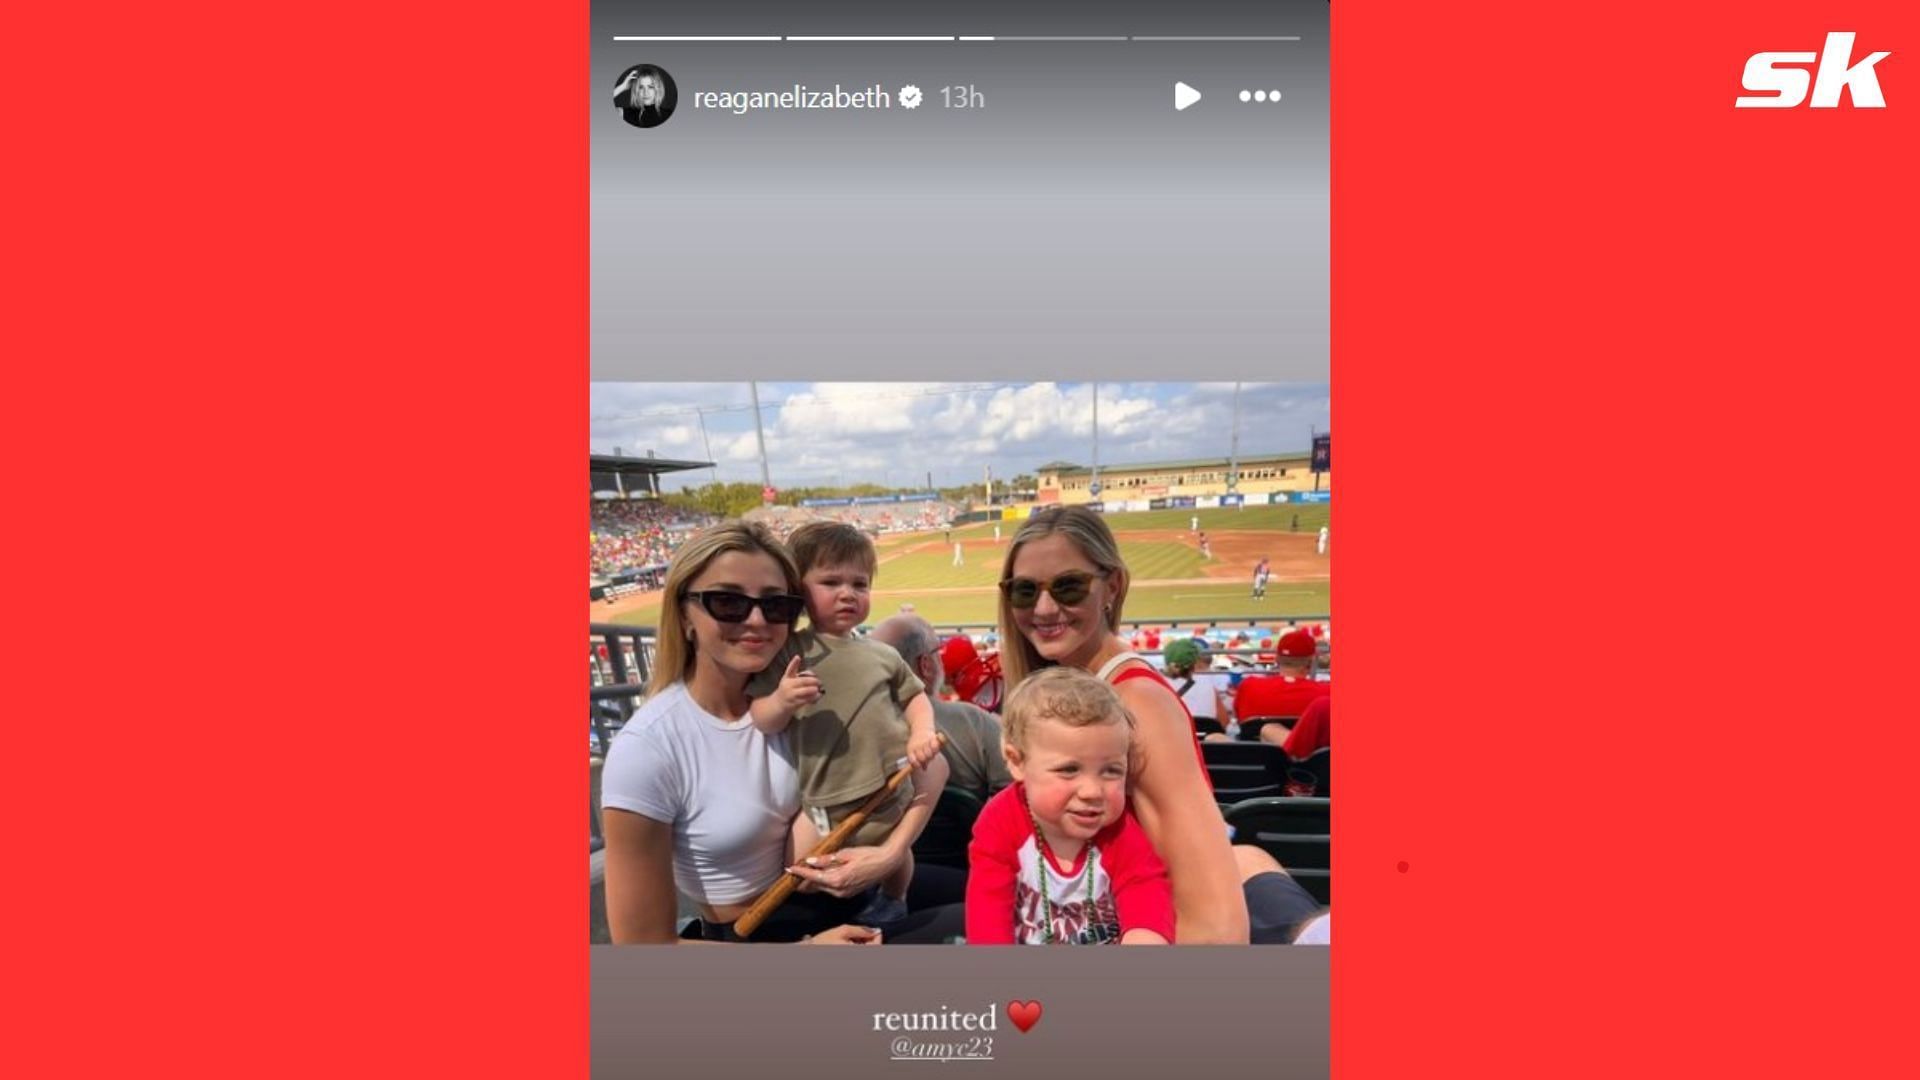 Alex Bregman;s wife Reagan took their son Knox to watch a game with Amy and Caden Cole